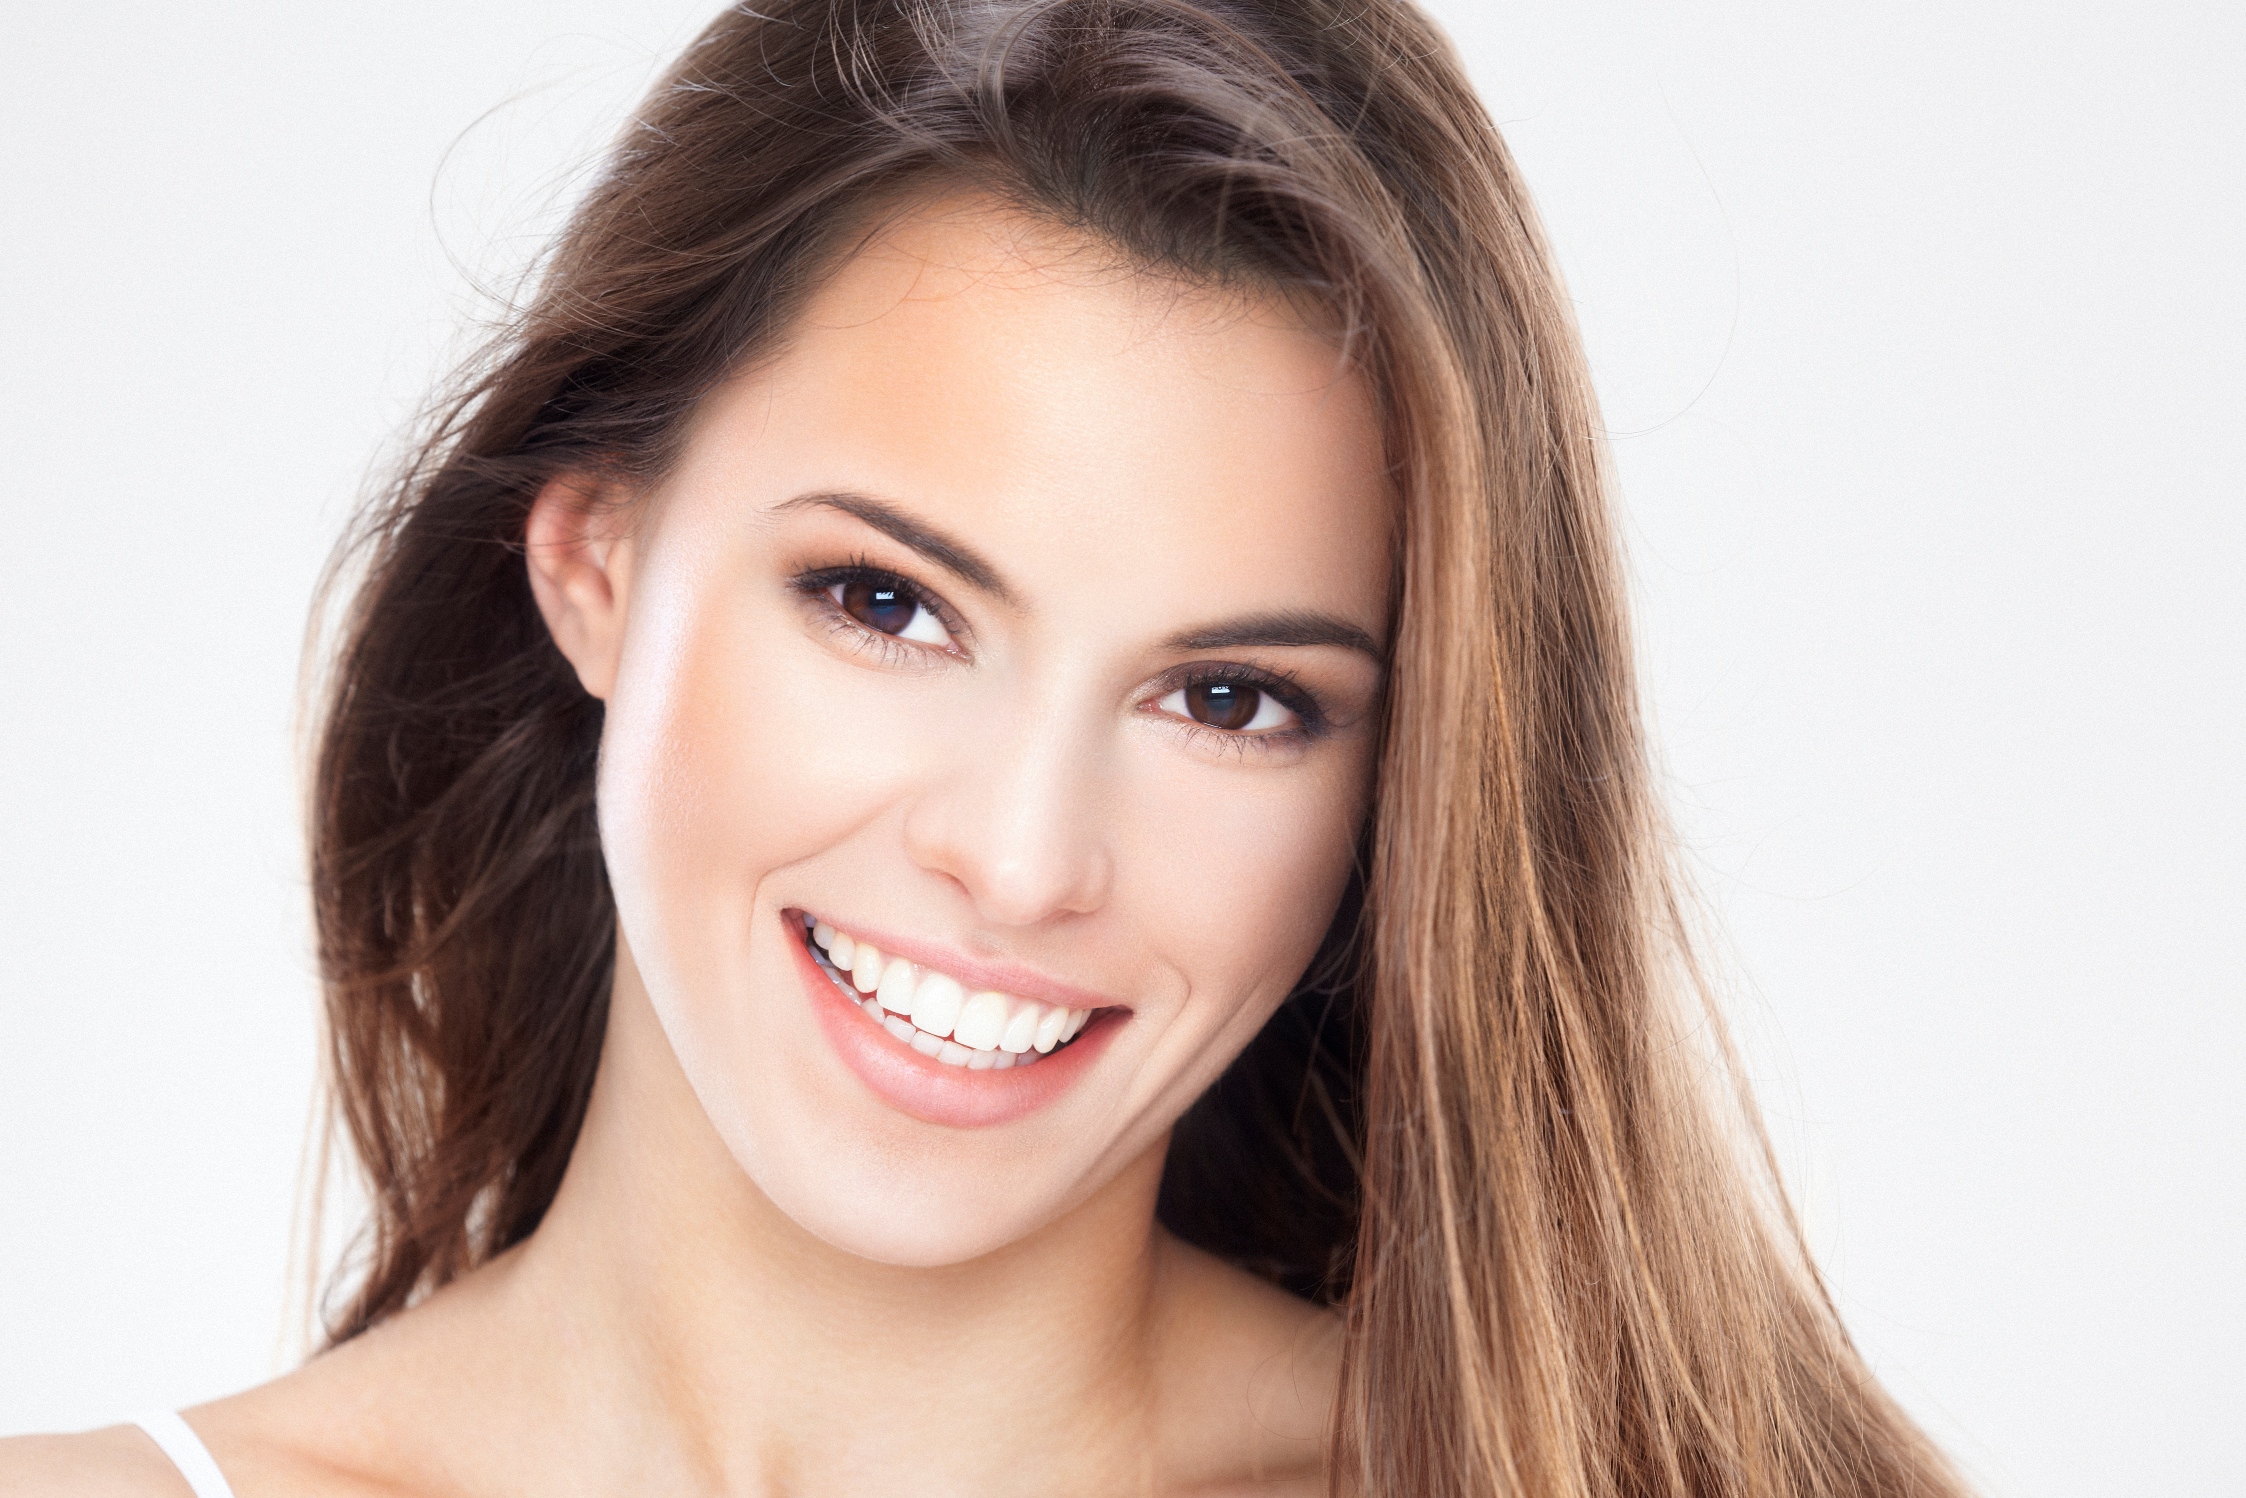 We are the best dentistry for Invisalign in Sydney.